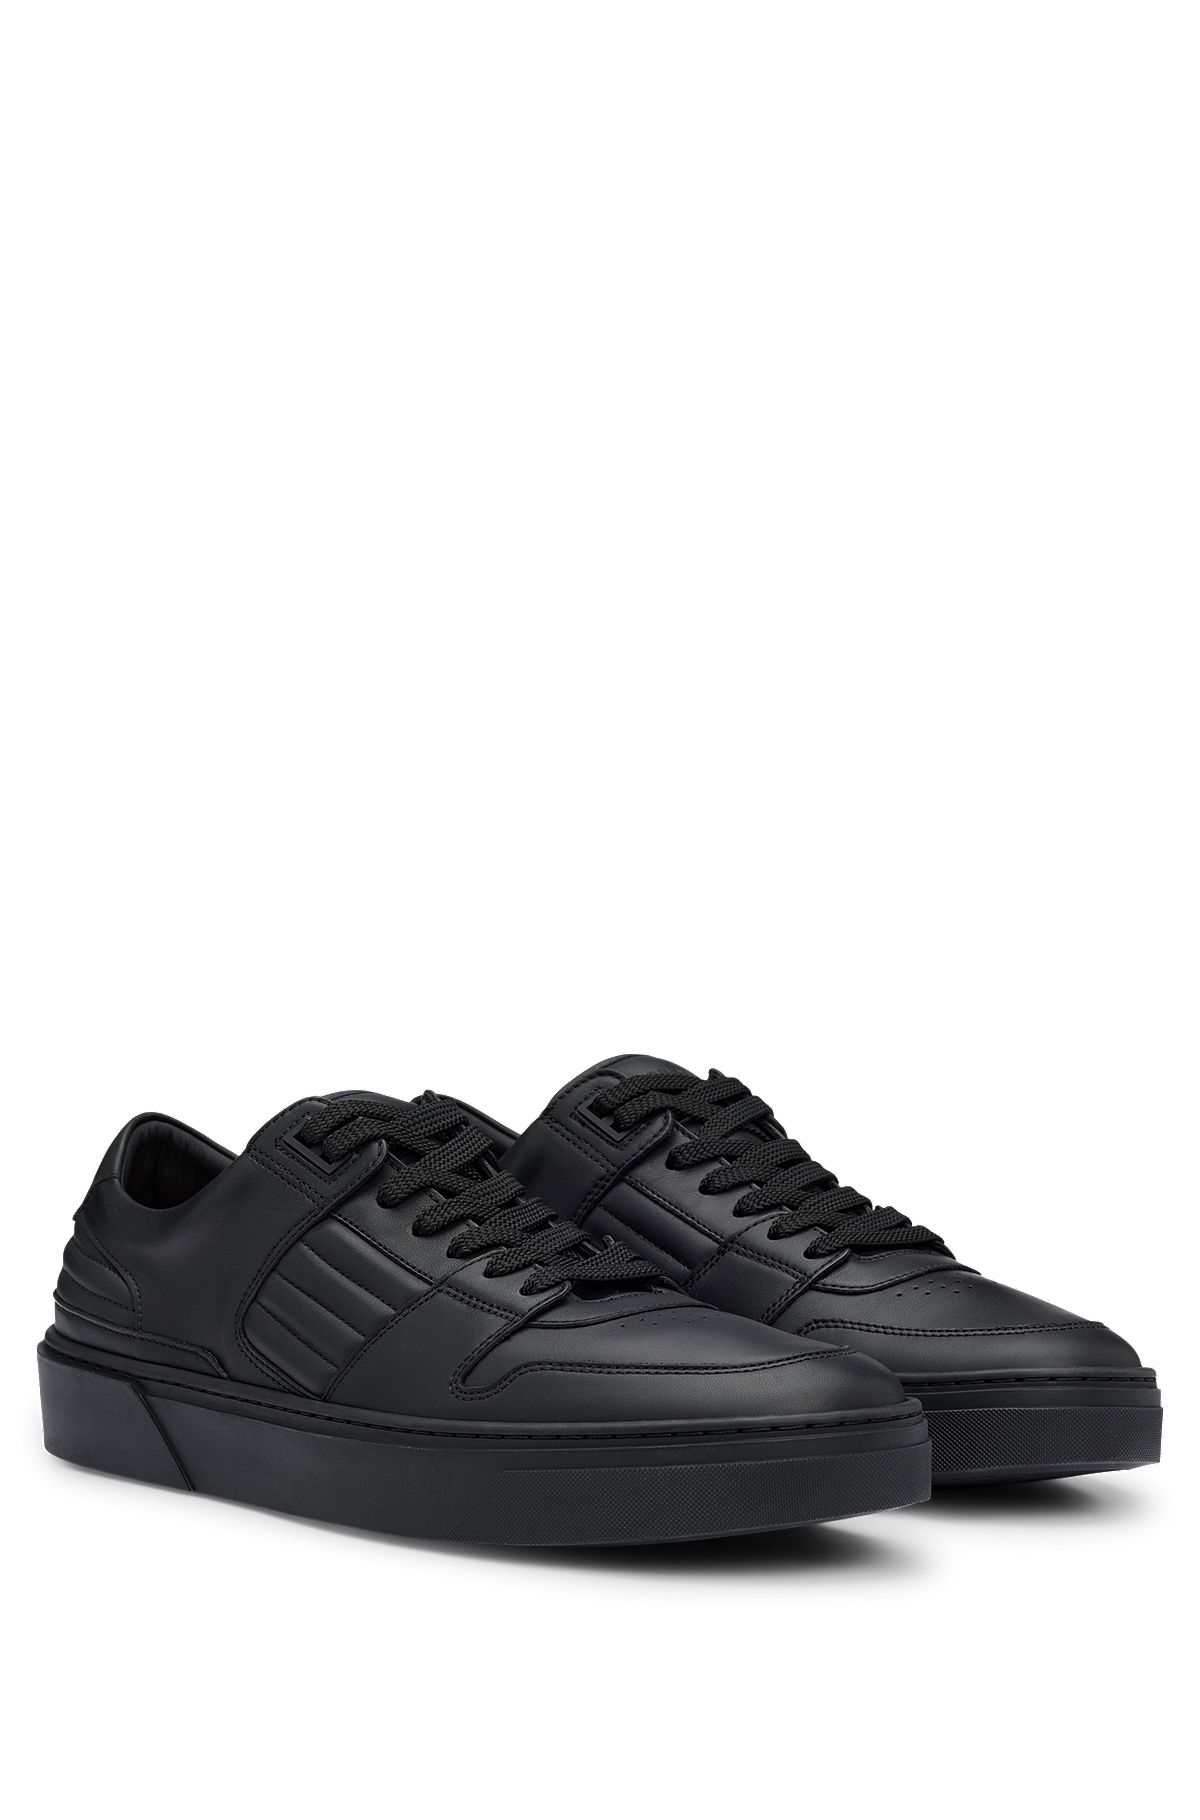 Porsche x BOSS leather trainers with padded details, Black